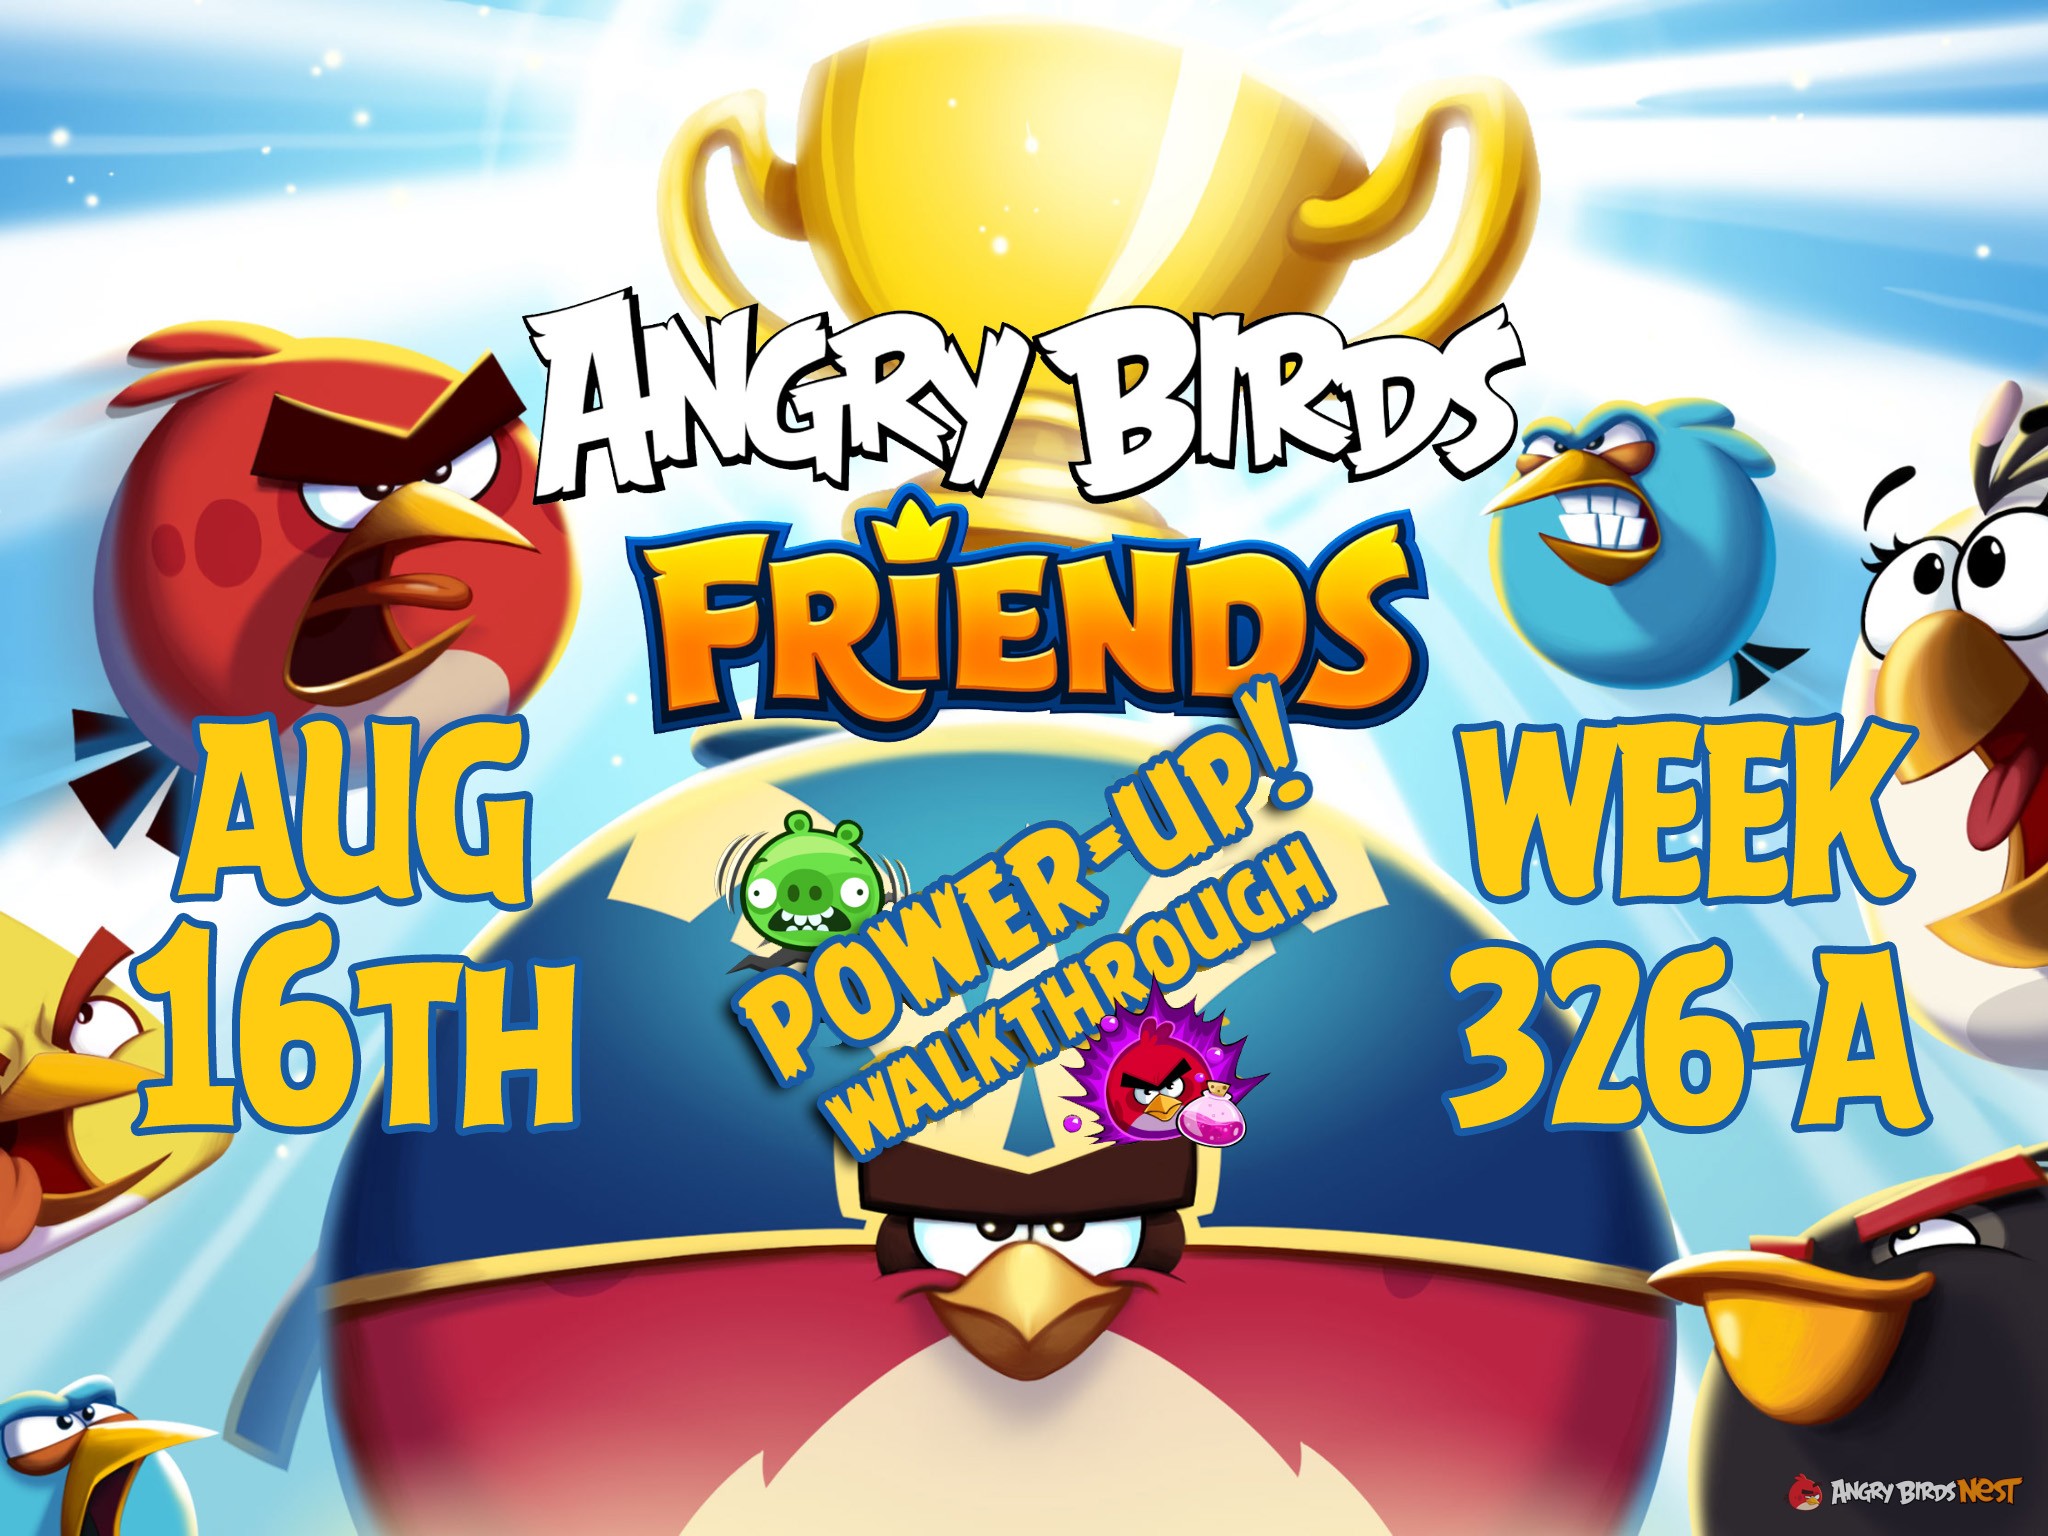 Angry-Birds-Friends-Tournament-Week-326-A-Feature-Image-PU